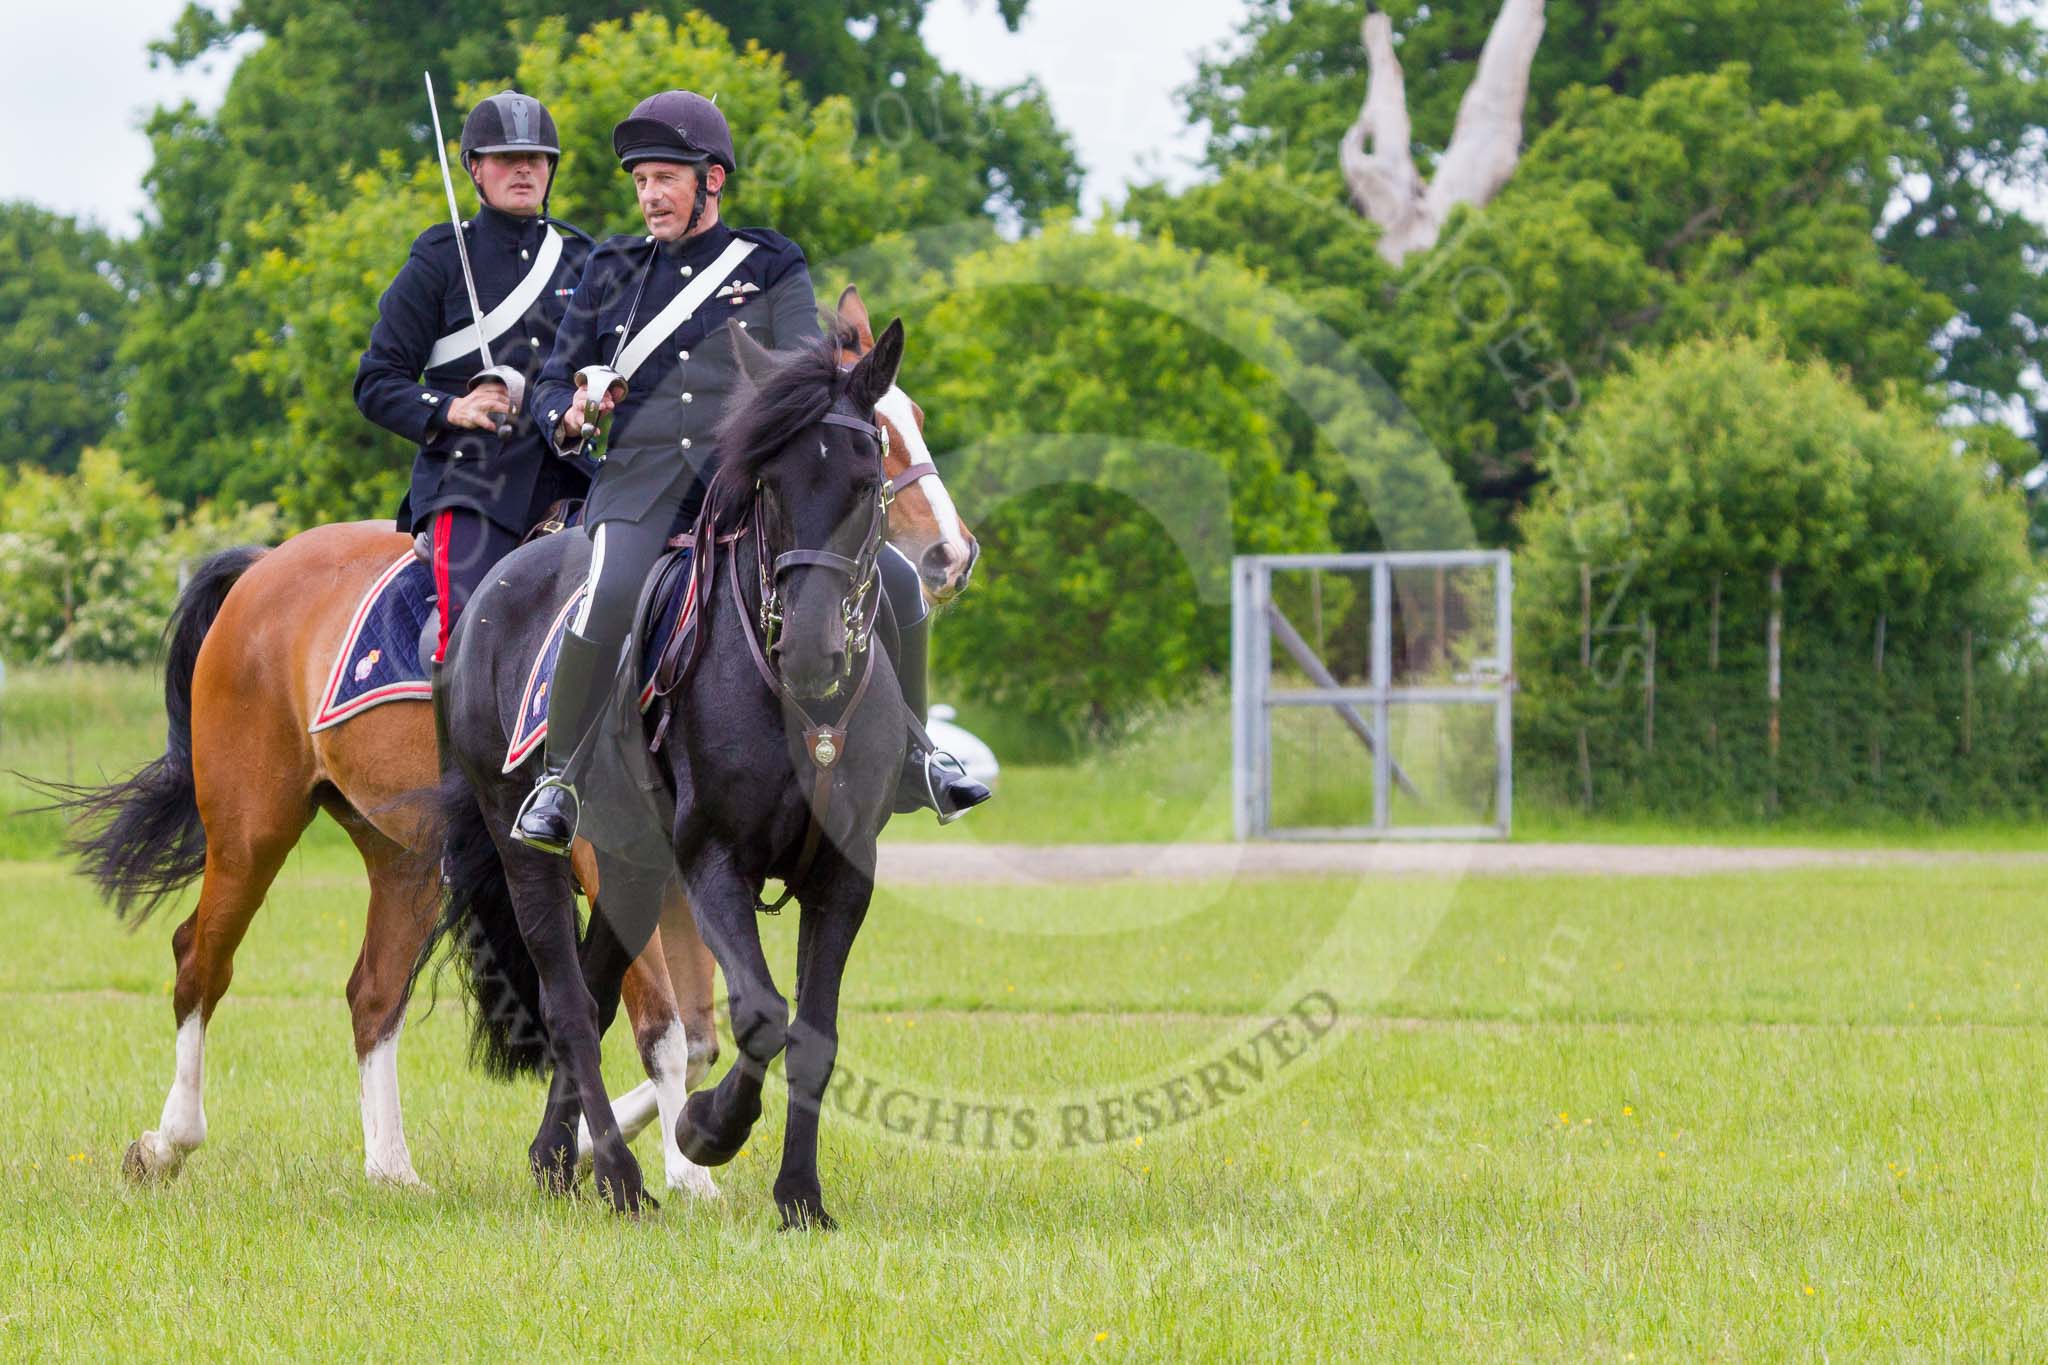 The Light Cavalry HAC Annual Review and Inspection 2013.
Windsor Great Park Review Ground,
Windsor,
Berkshire,
United Kingdom,
on 09 June 2013 at 15:03, image #613